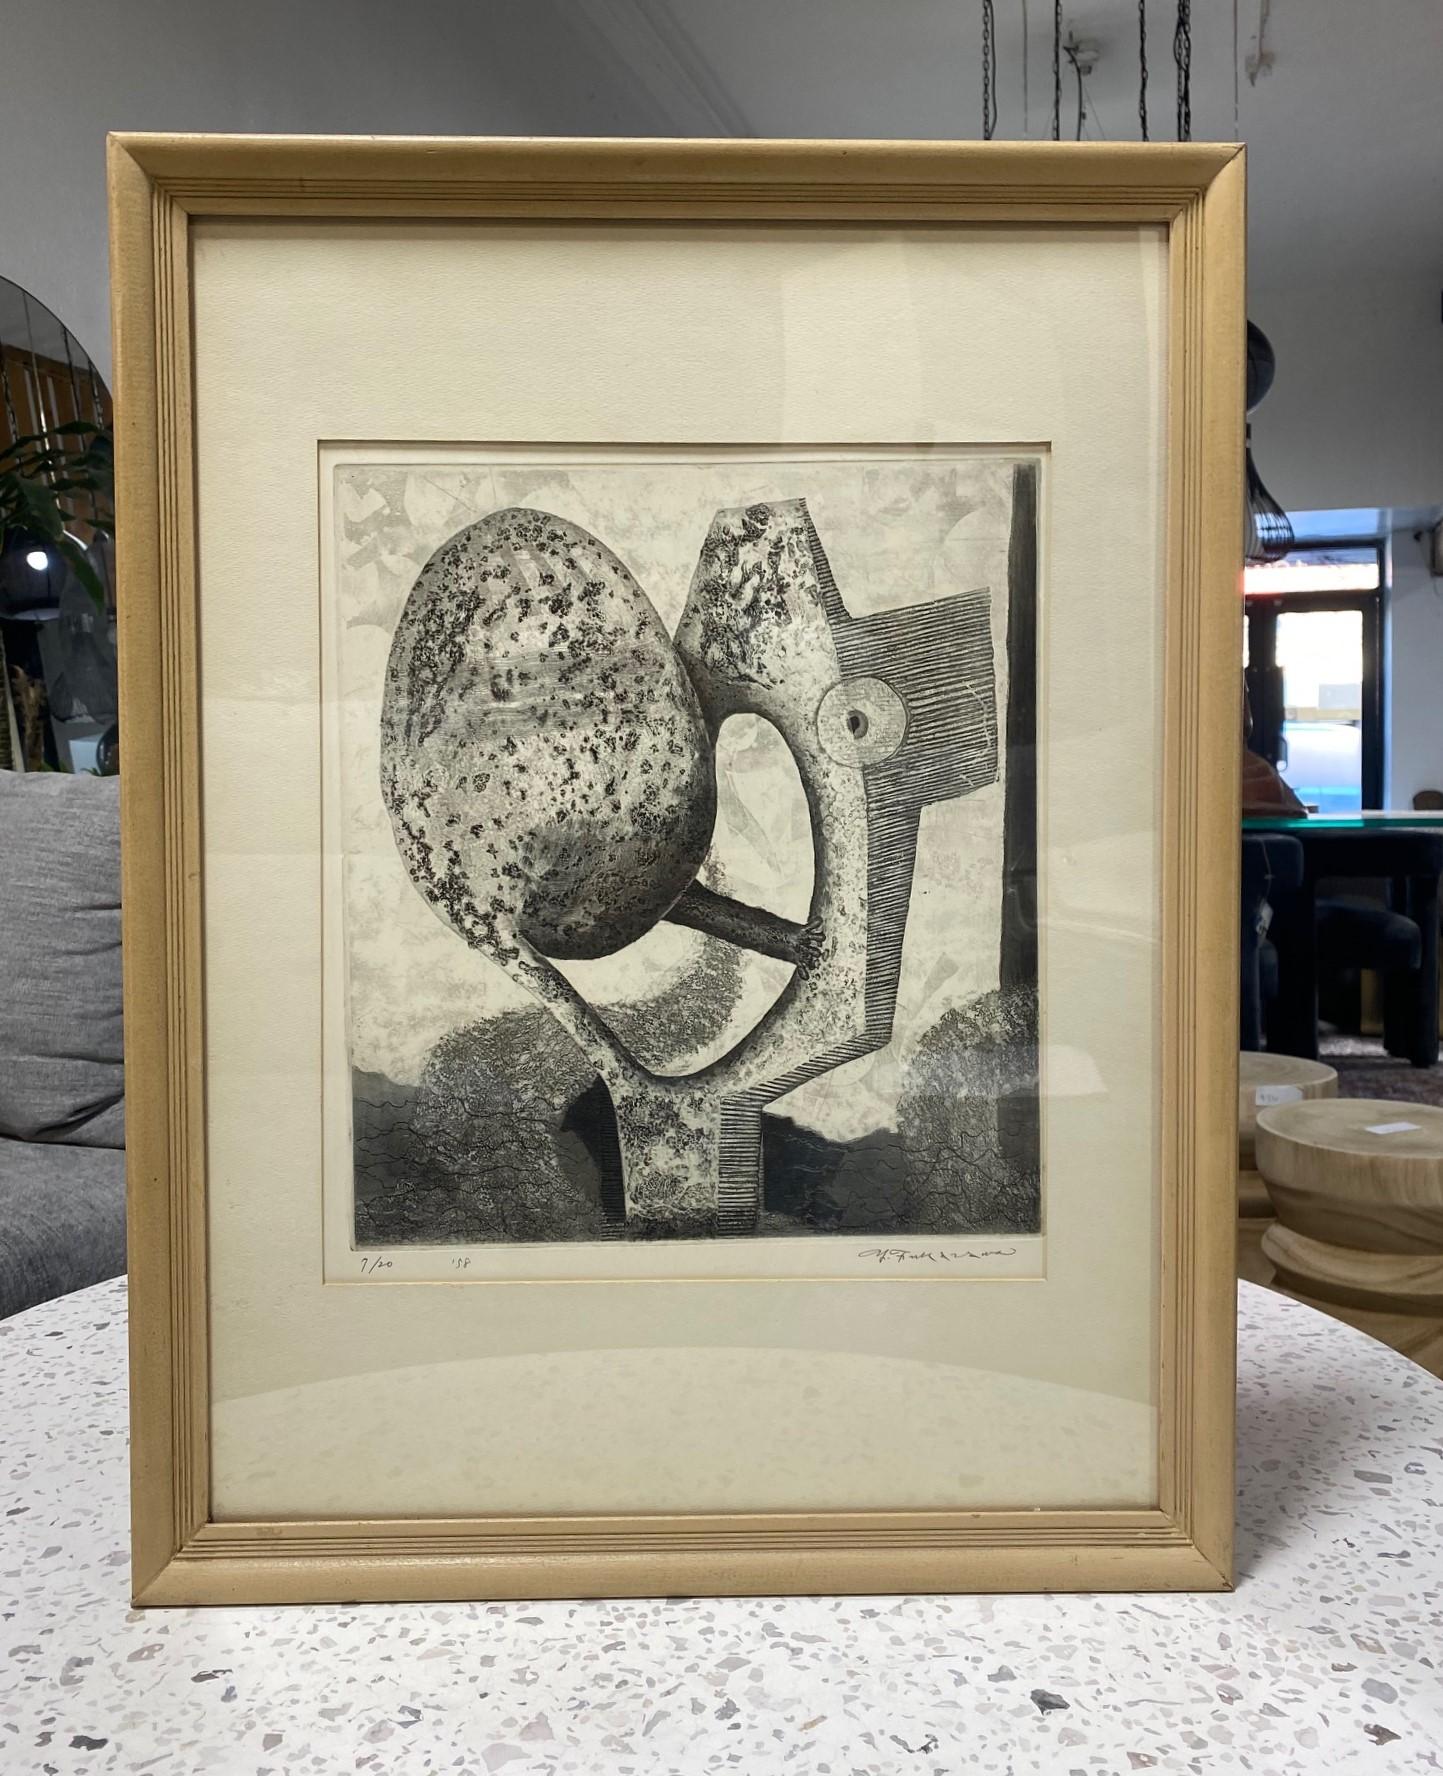 A truly wonderful and sublimely strange Mid-century Modern abstract work by Japanese artist Yukio Fukazawa. (1924-).  

The aquatint etching print is pencil hand signed, dated (1958) and numbered (7/20) by the artist in the lower margin.  

Would be